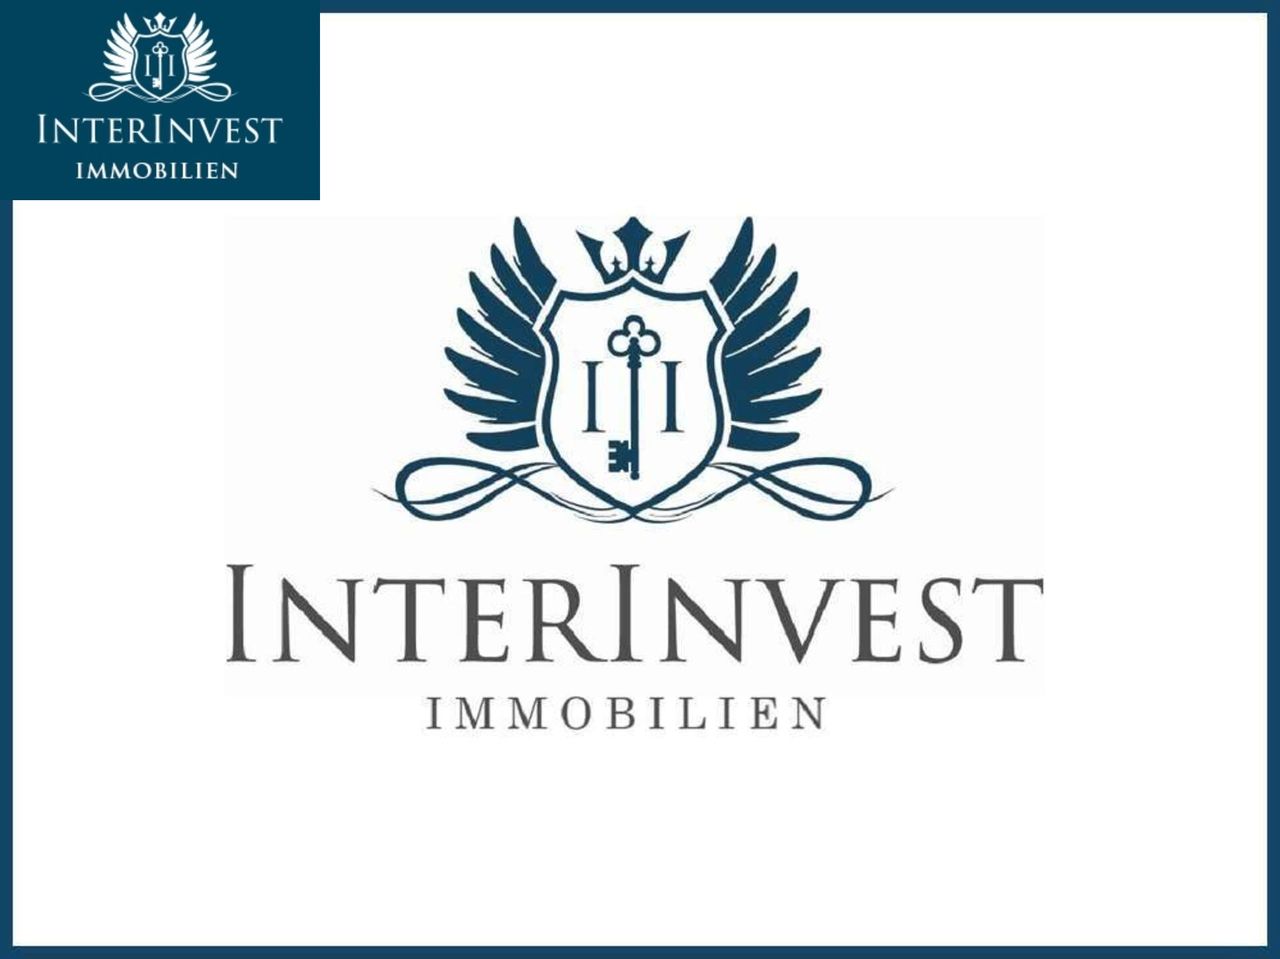 InterInvest Immobilien